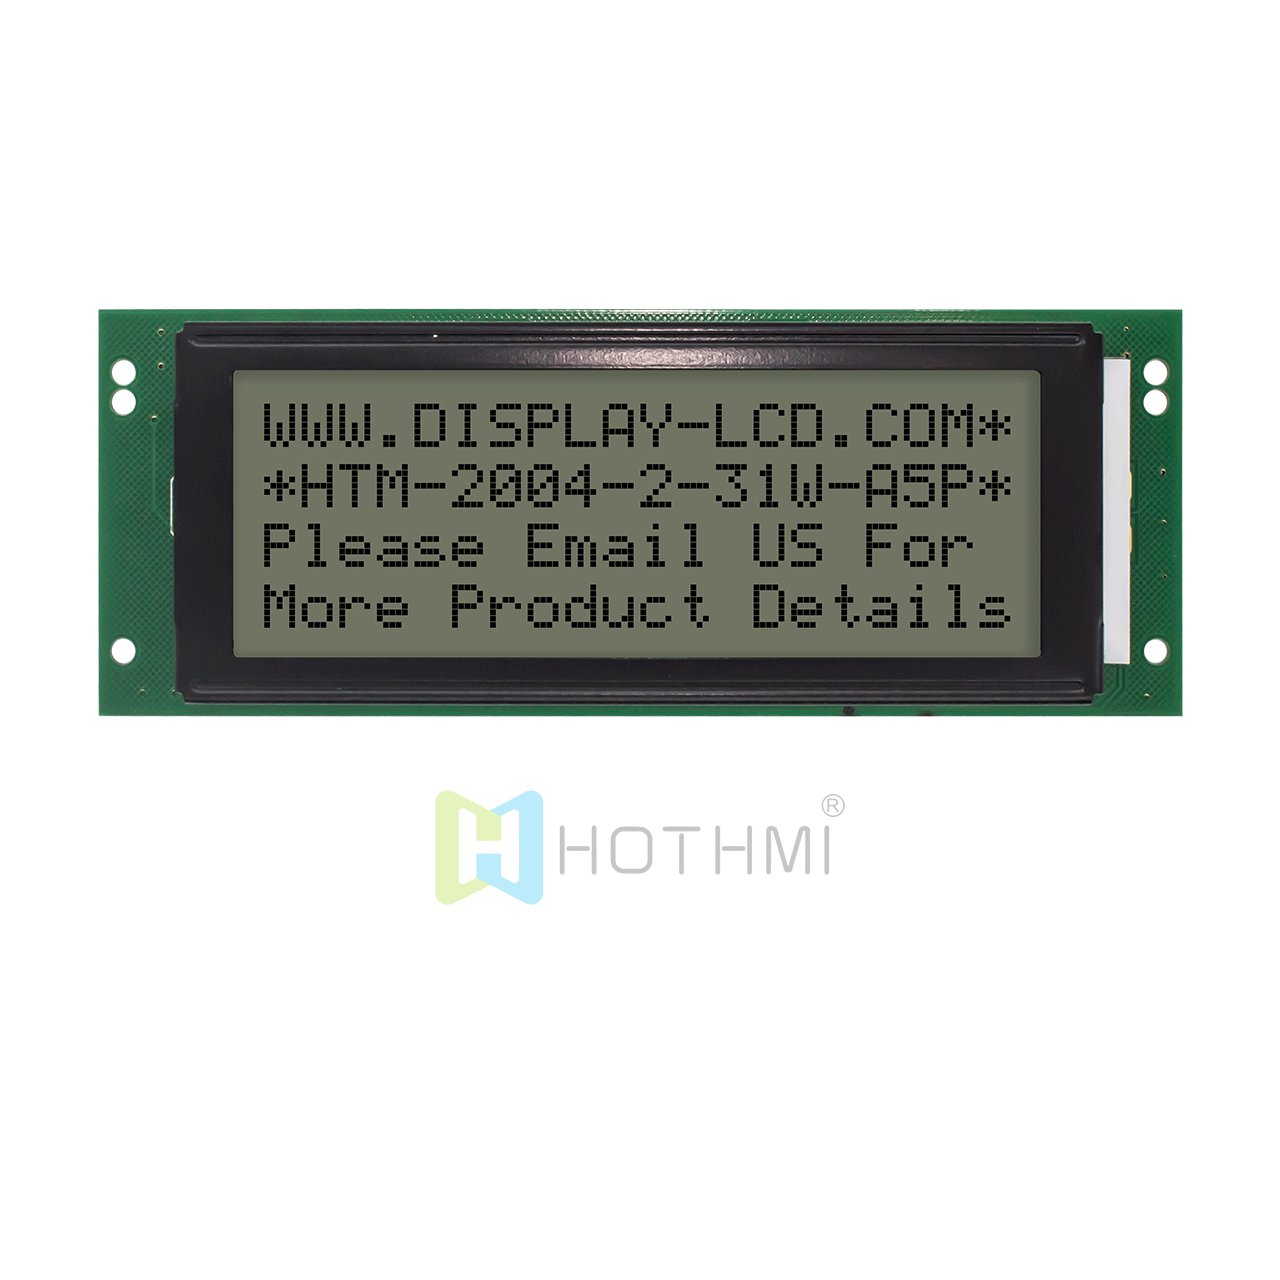 5.0V/4X20 monochrome character LCD module/STN+ display/with white backlight/white background gray text display/Arduino display